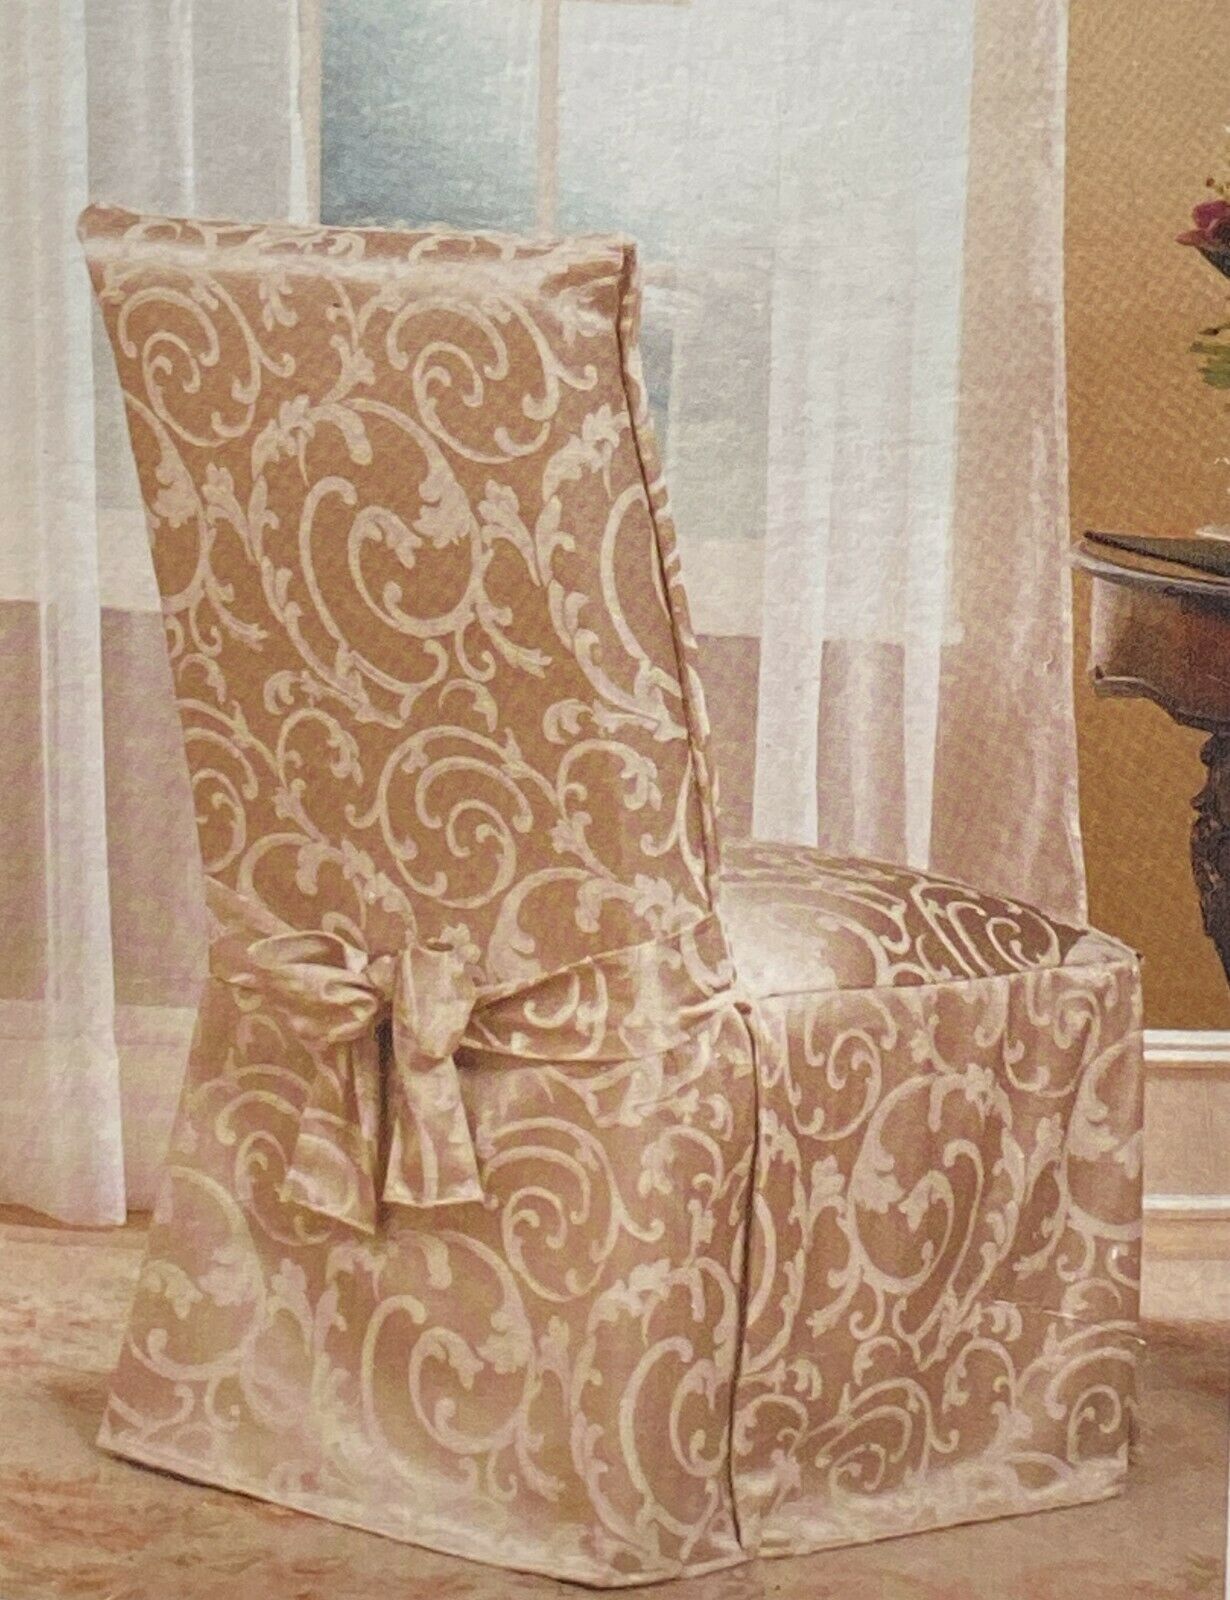 Dining Chair Cover for Armless Chairs Heavy Scroll Design New Old Stock - $21.49